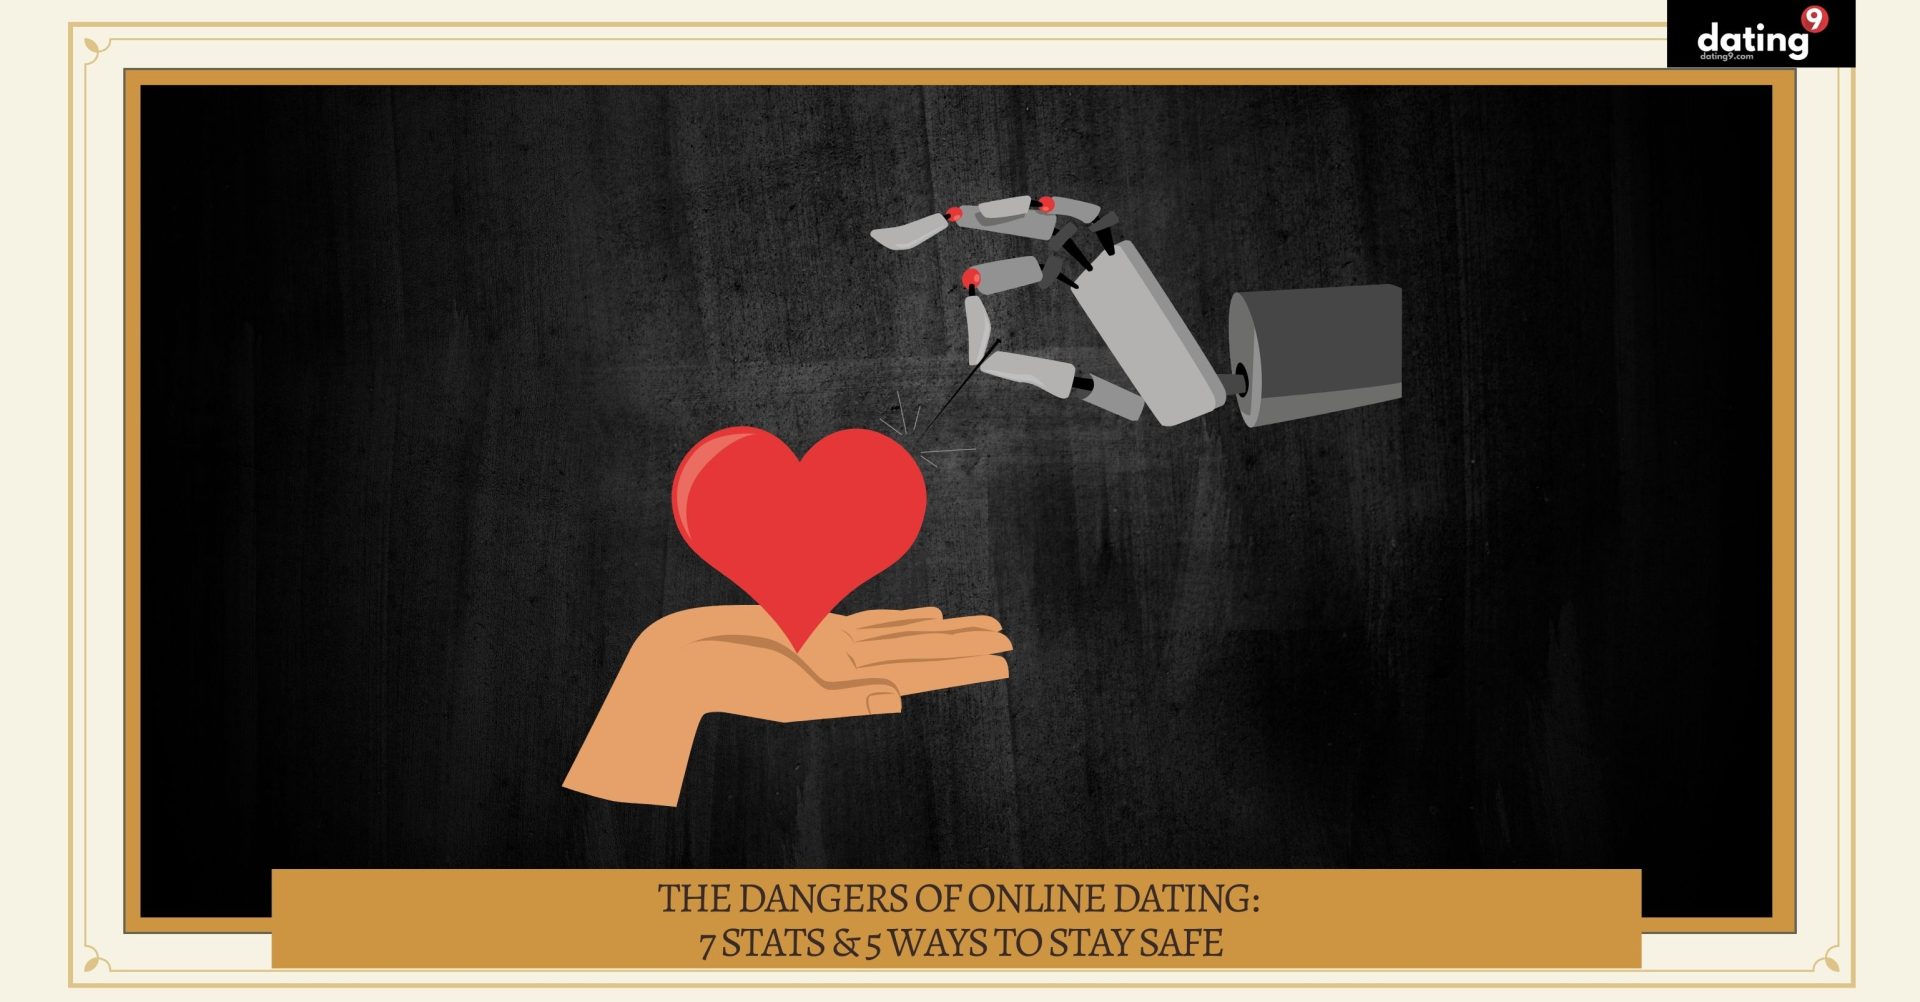 The Dangers of Online Dating: 7 Stats & 5 Ways to Stay Safe